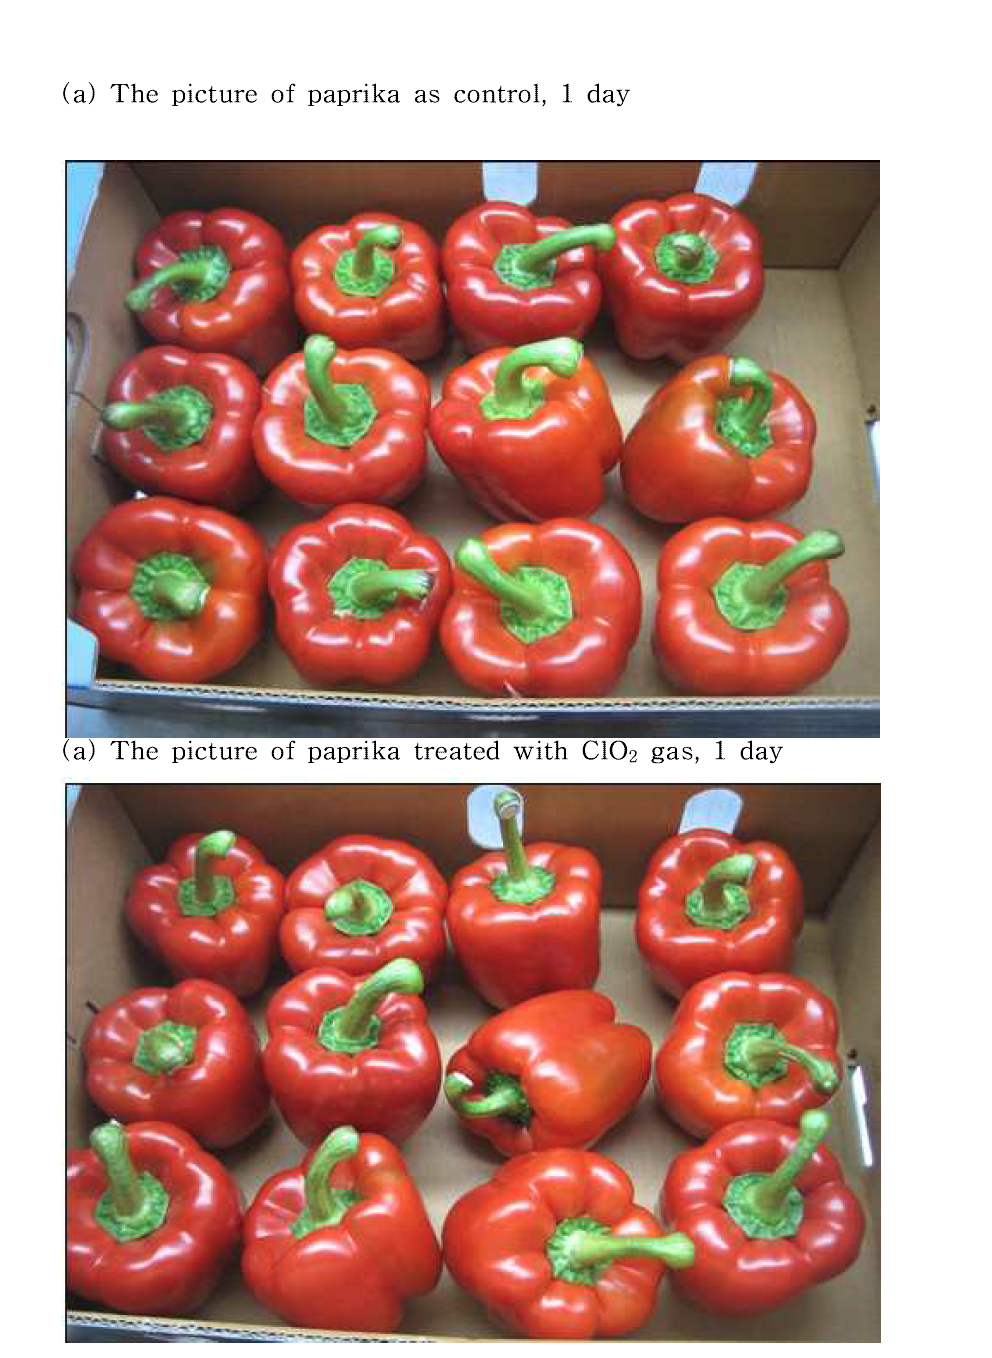 The appearance of paprika treated without or with ClO2 gas on storage at 8°C, RH 60%